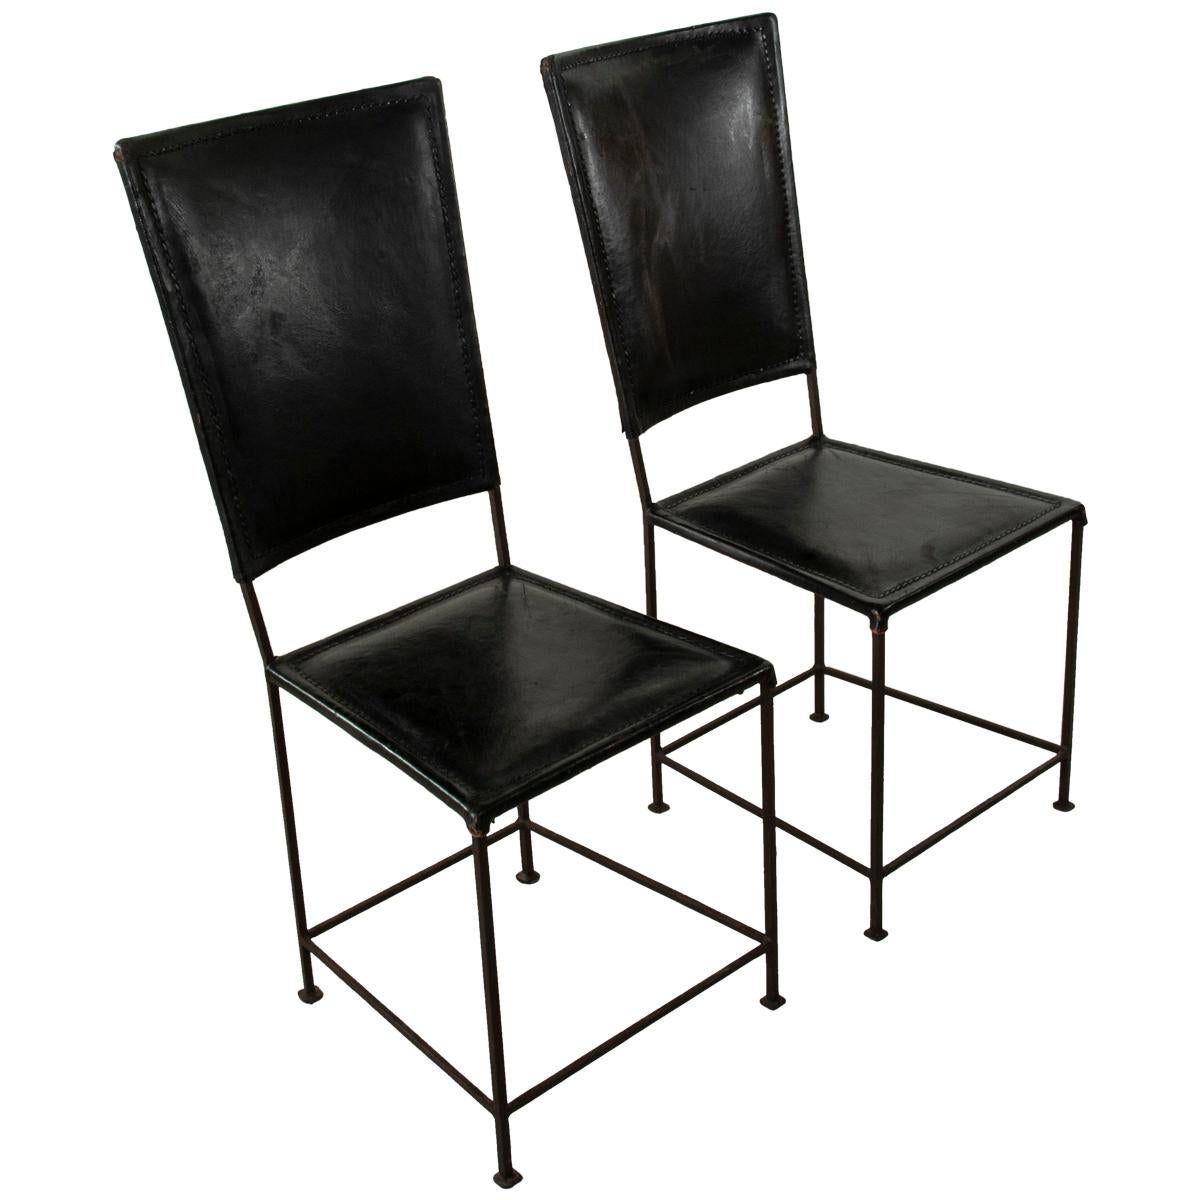 Mid-20th Century French Iron Side Chairs With Leather Seats and Backs